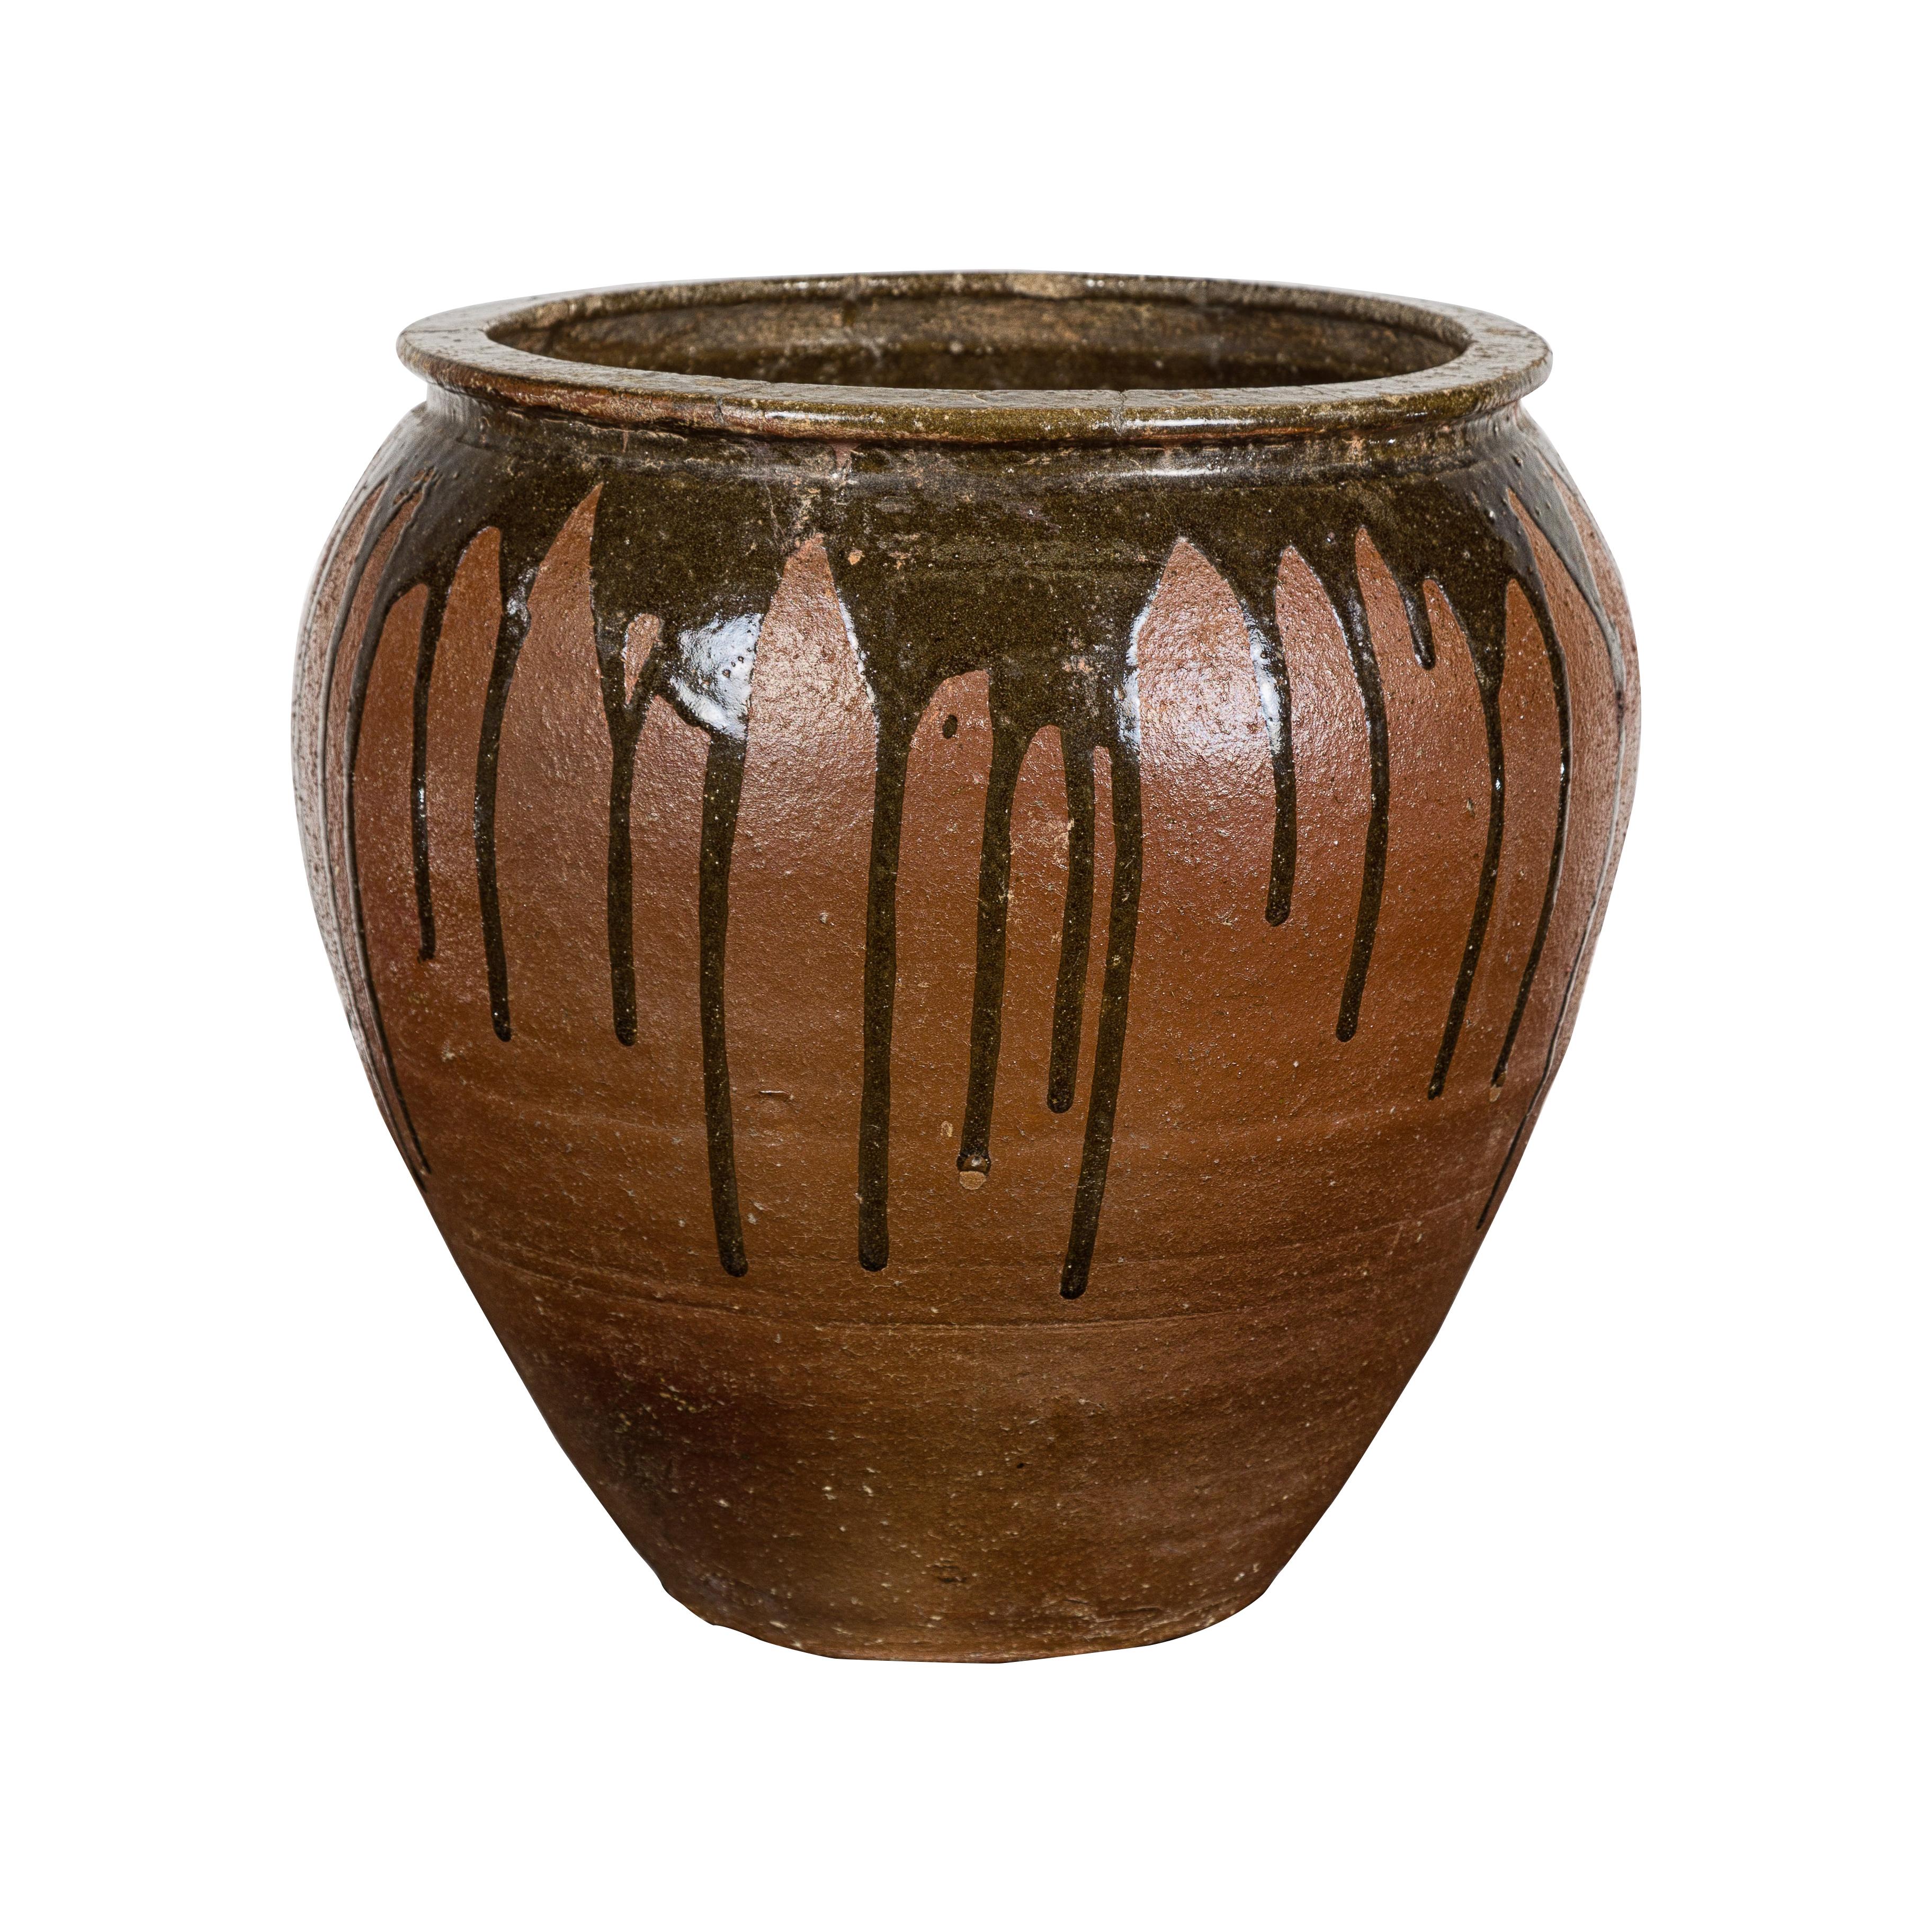 Japanese Tamba Ware Brown Glazed Ceramic Salt Pot Planter with Dripping For Sale 11